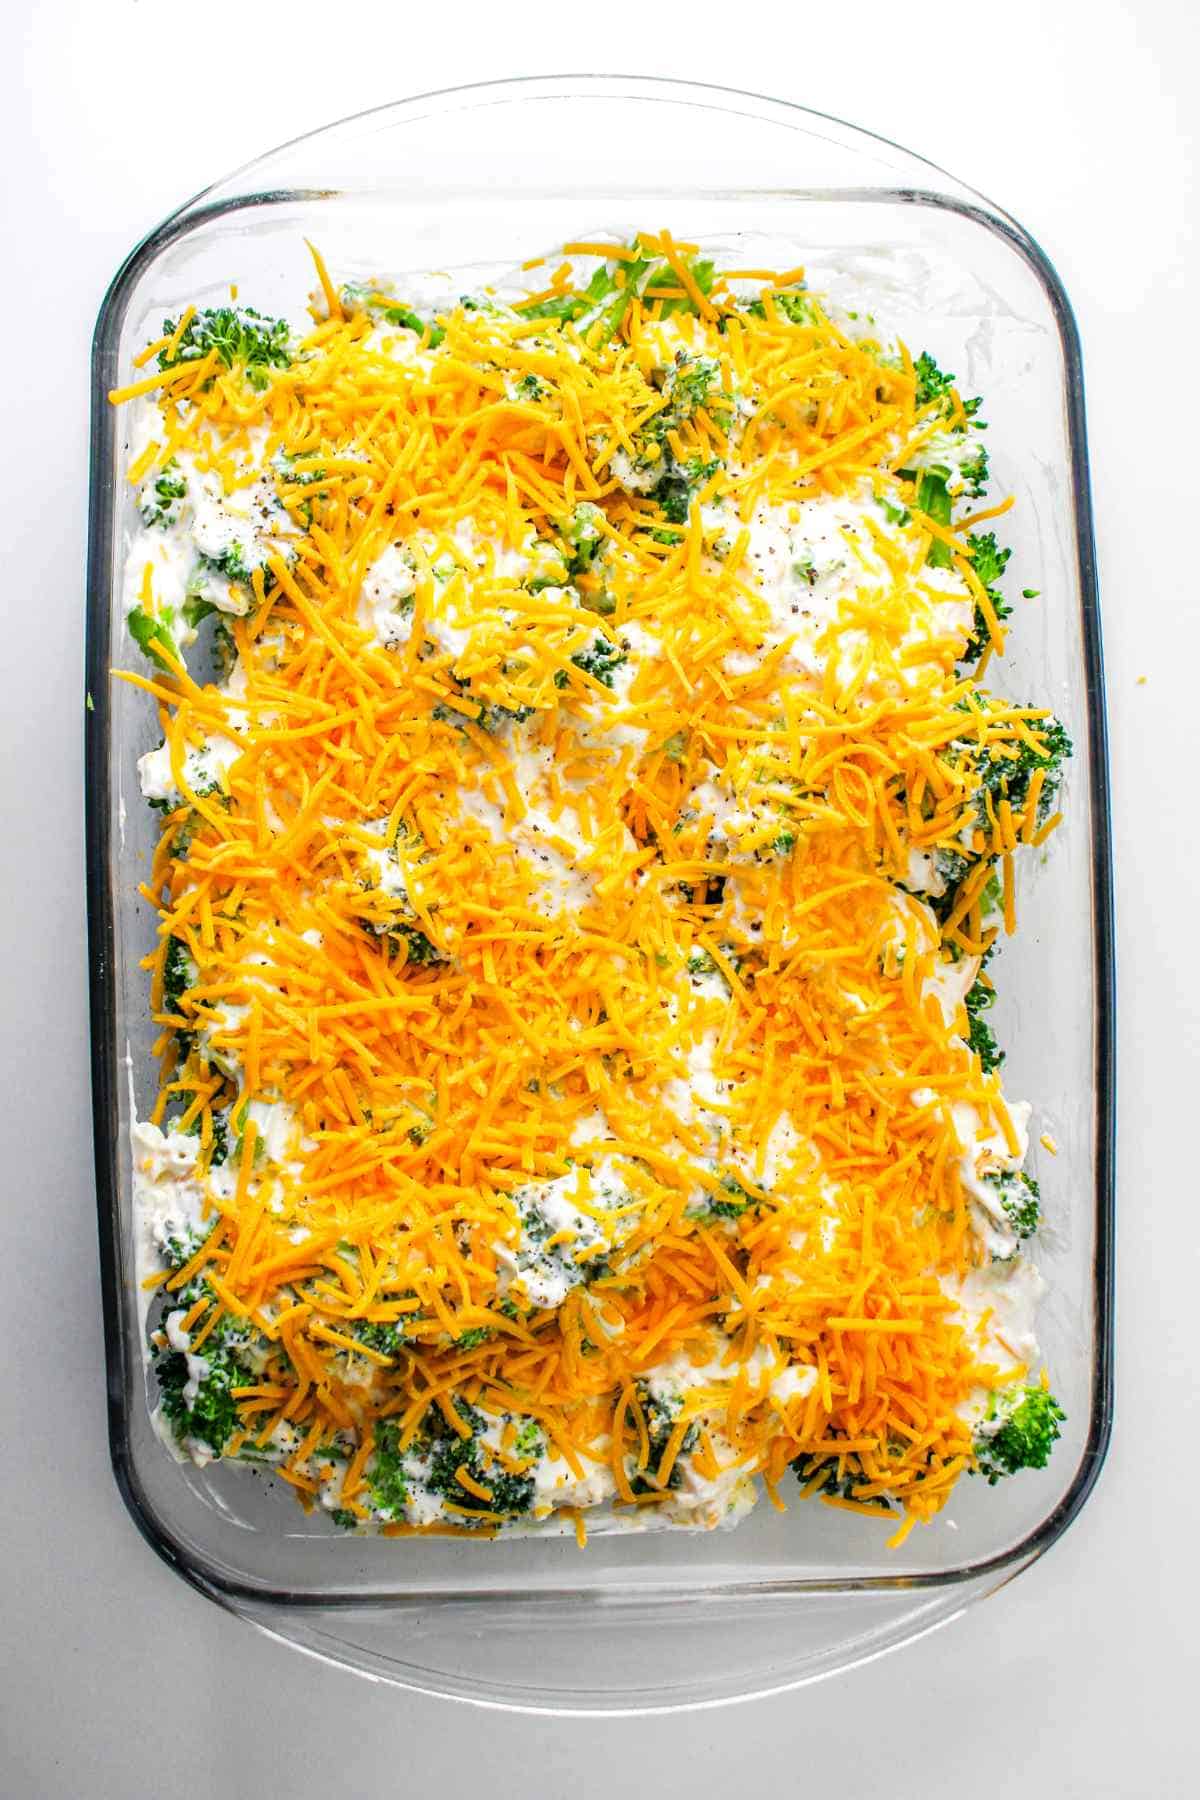 layered broccoli casserole with cheddar cheese on top.